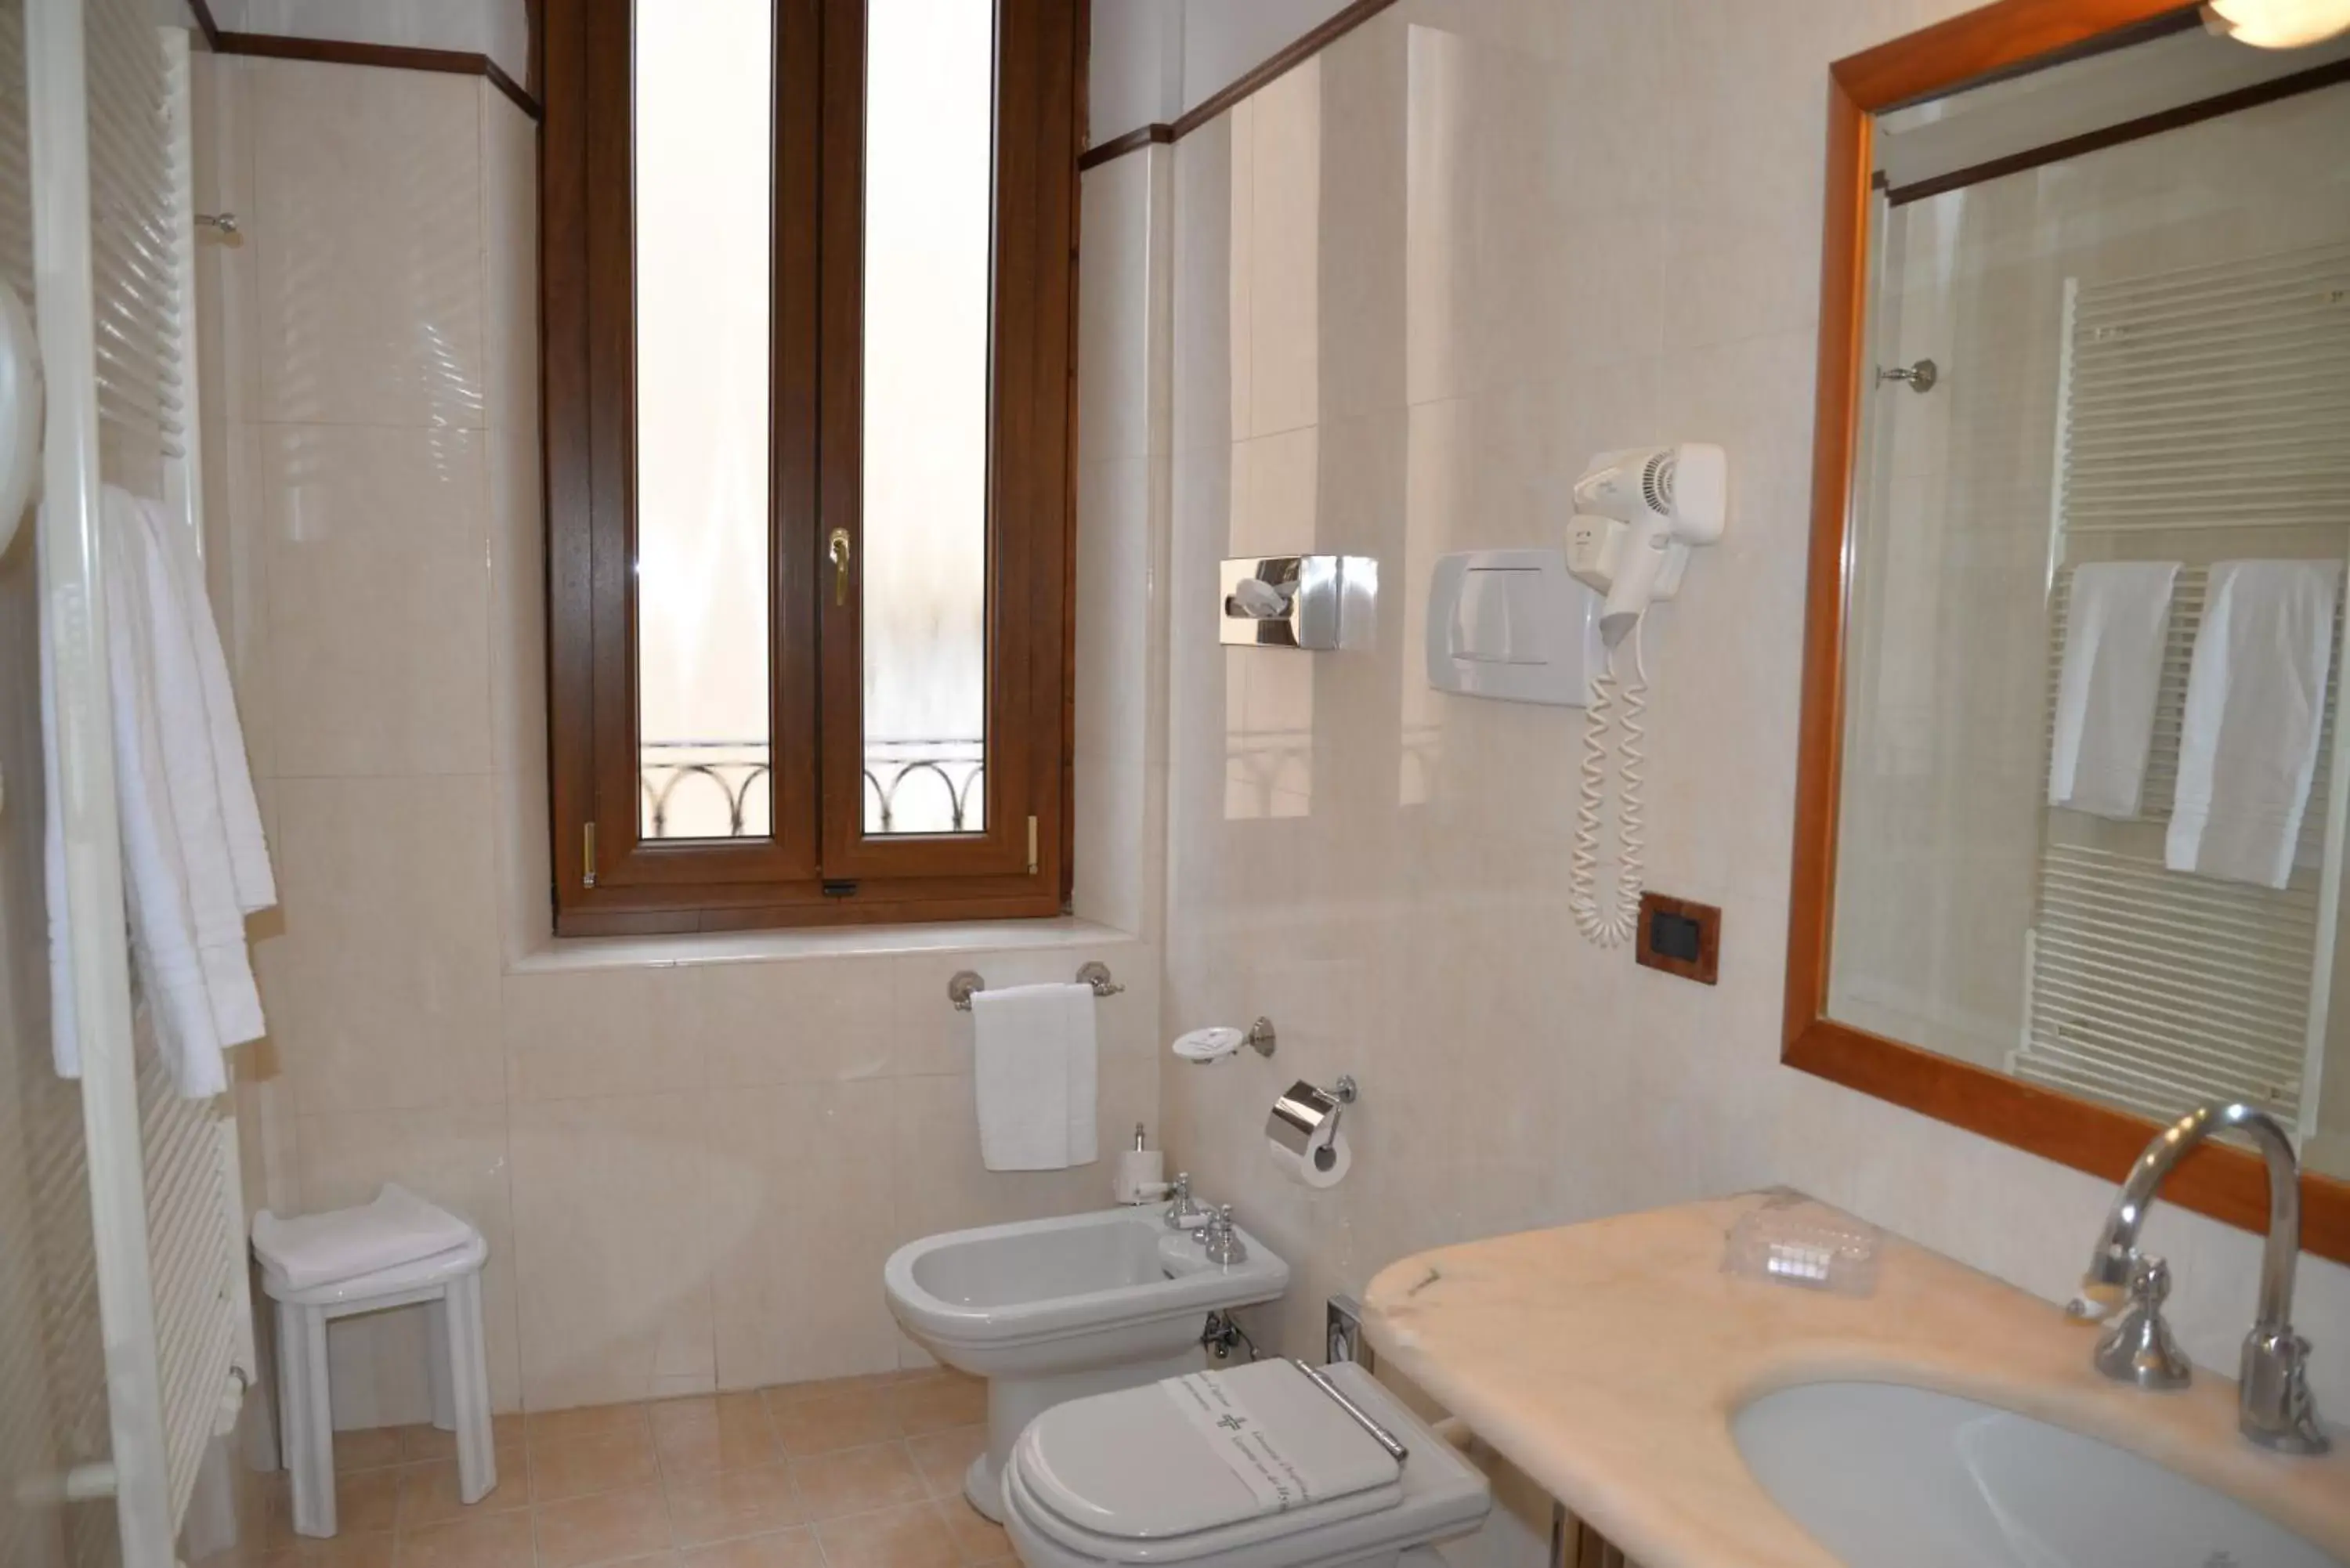 Bathroom in Strozzi Palace Hotel